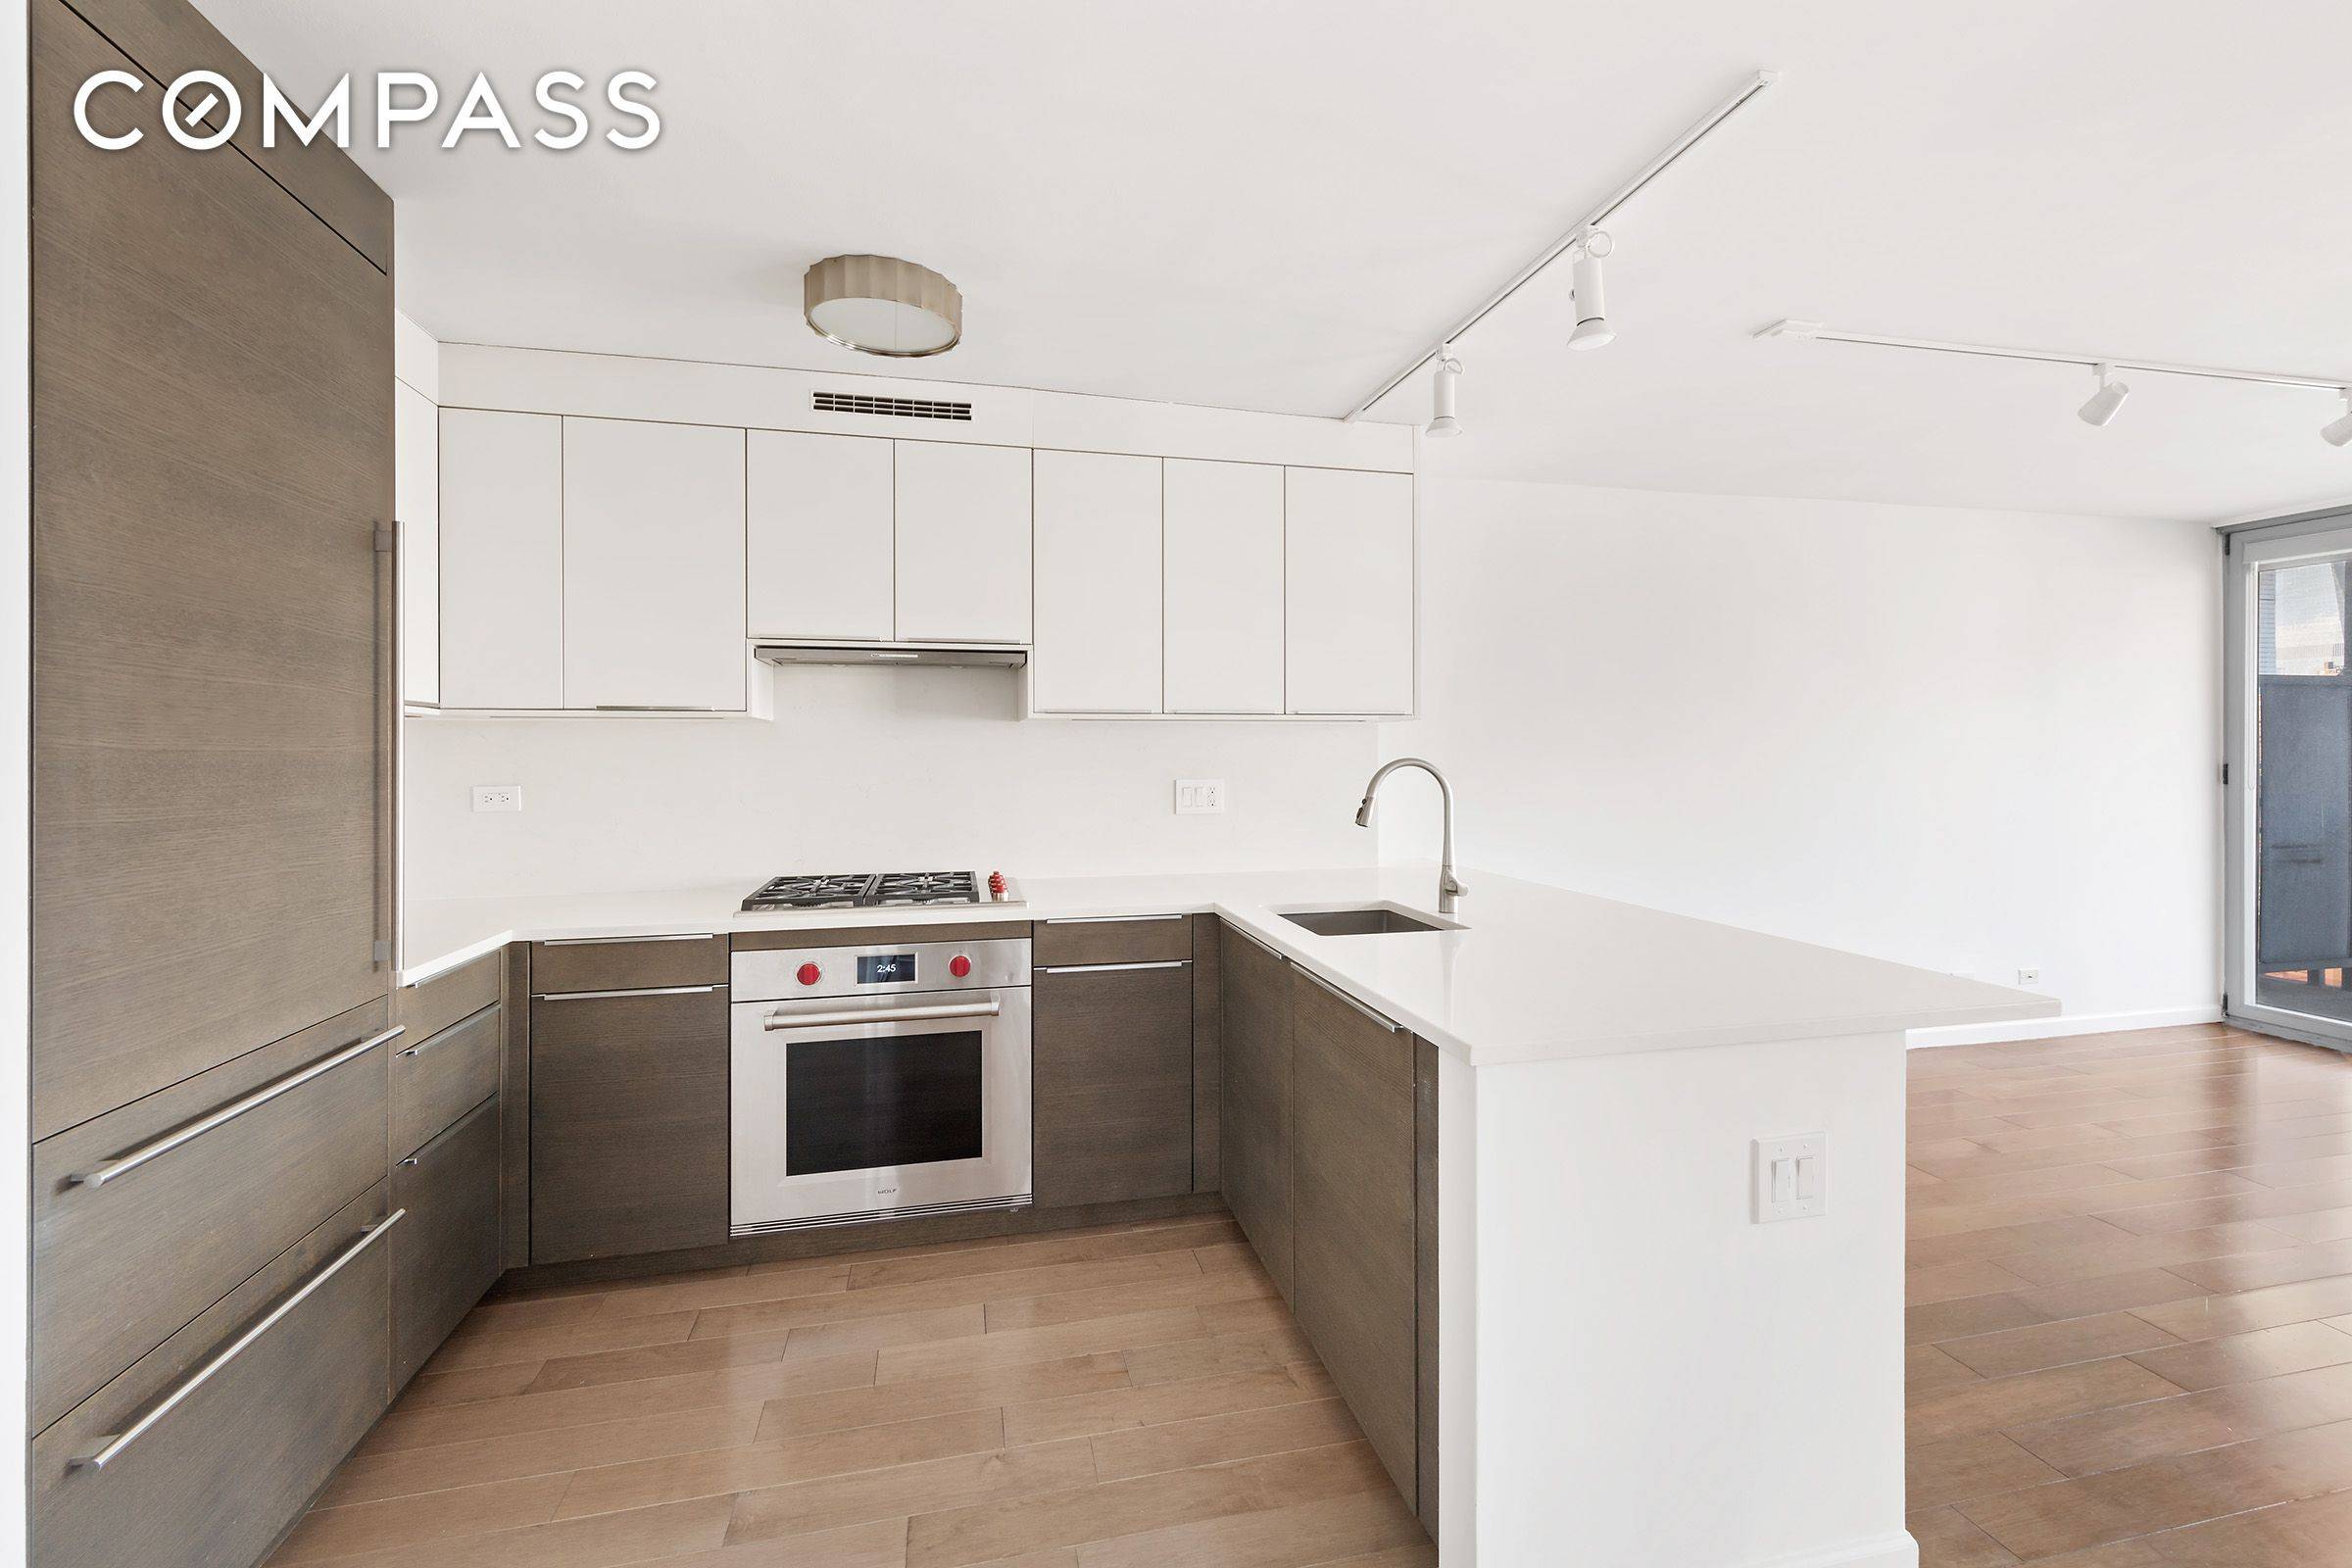 Available Immediate. Beautifully renovated apartment located in the heart of vibrant Chelsea neighborhood.